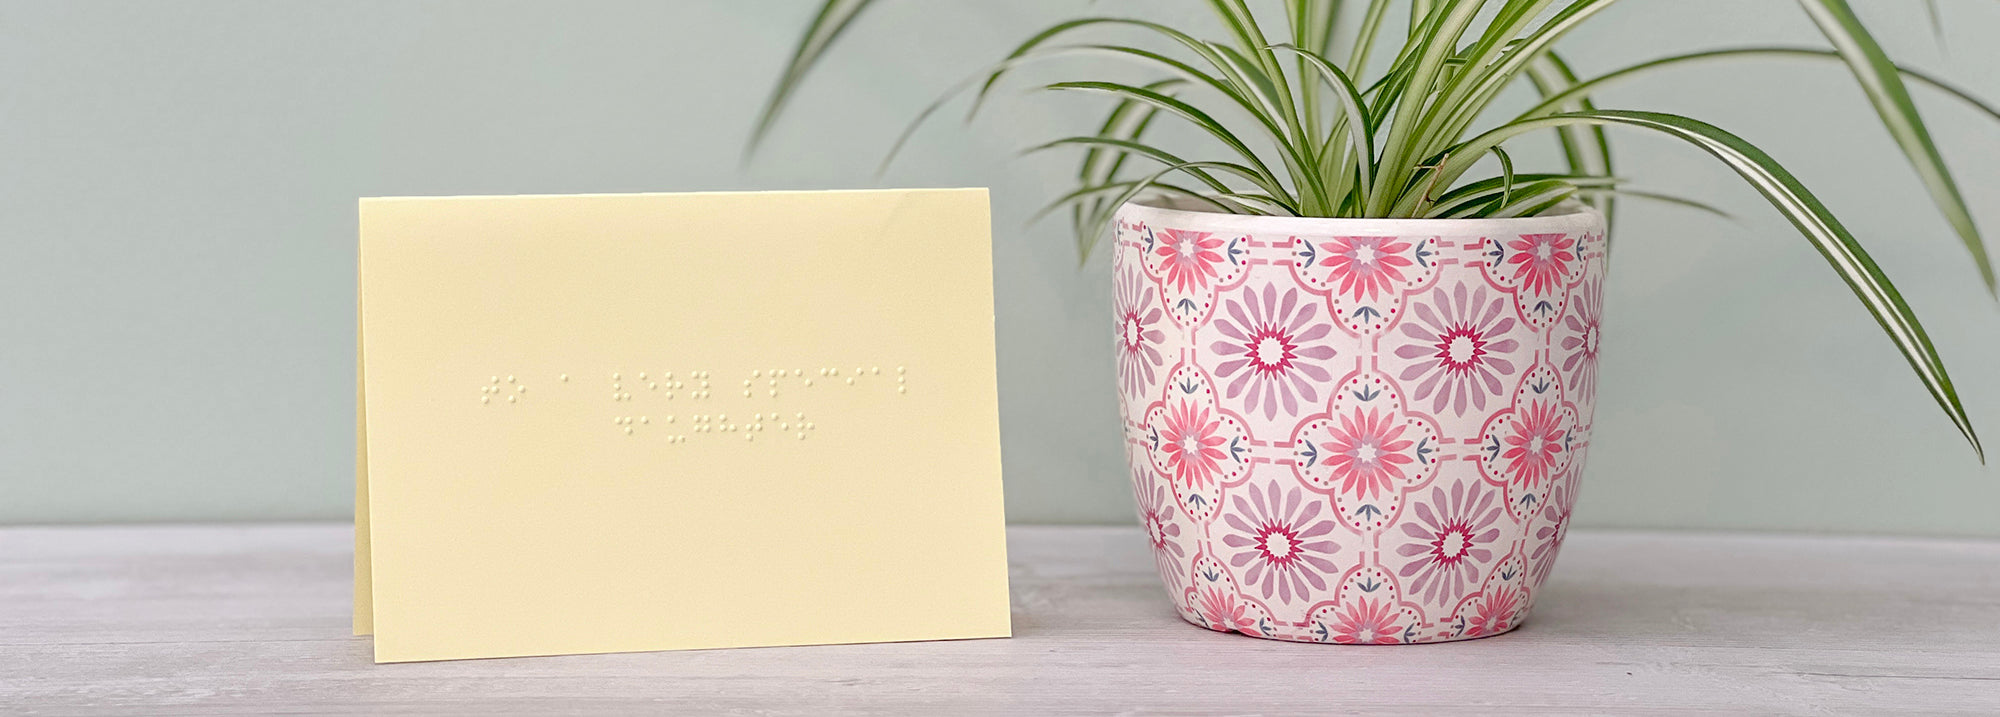 A yellow greetings card saying to a very special daughter in braille. There is a pink patterned vase to the right with a spider plant just visible.